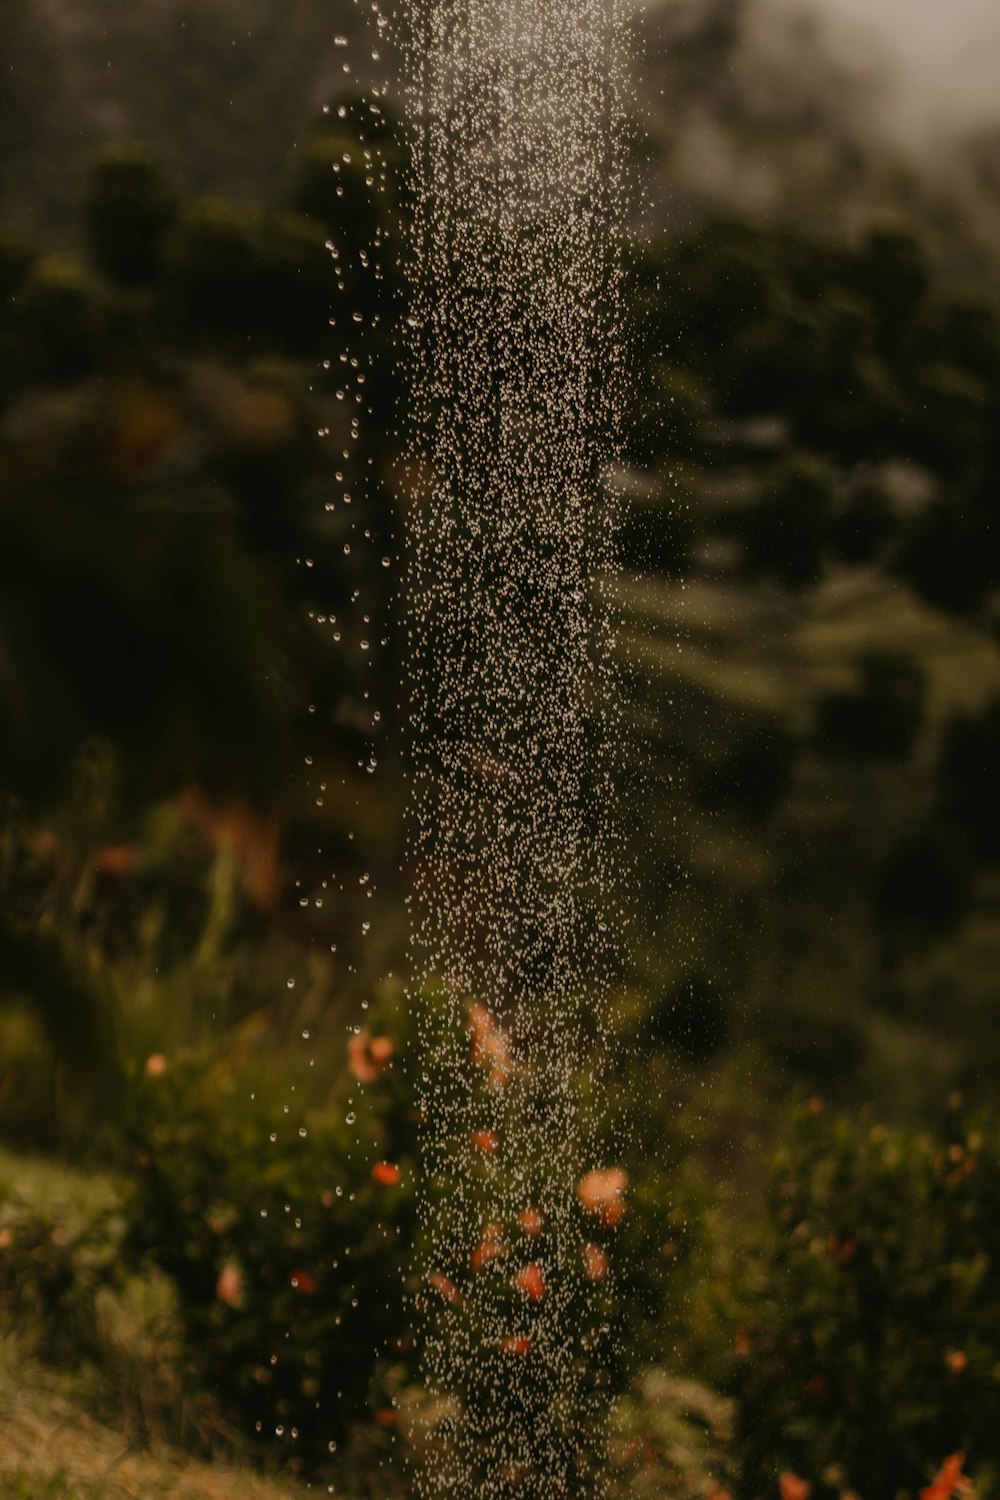 a close up of a sprinkle of water from a sprinkler